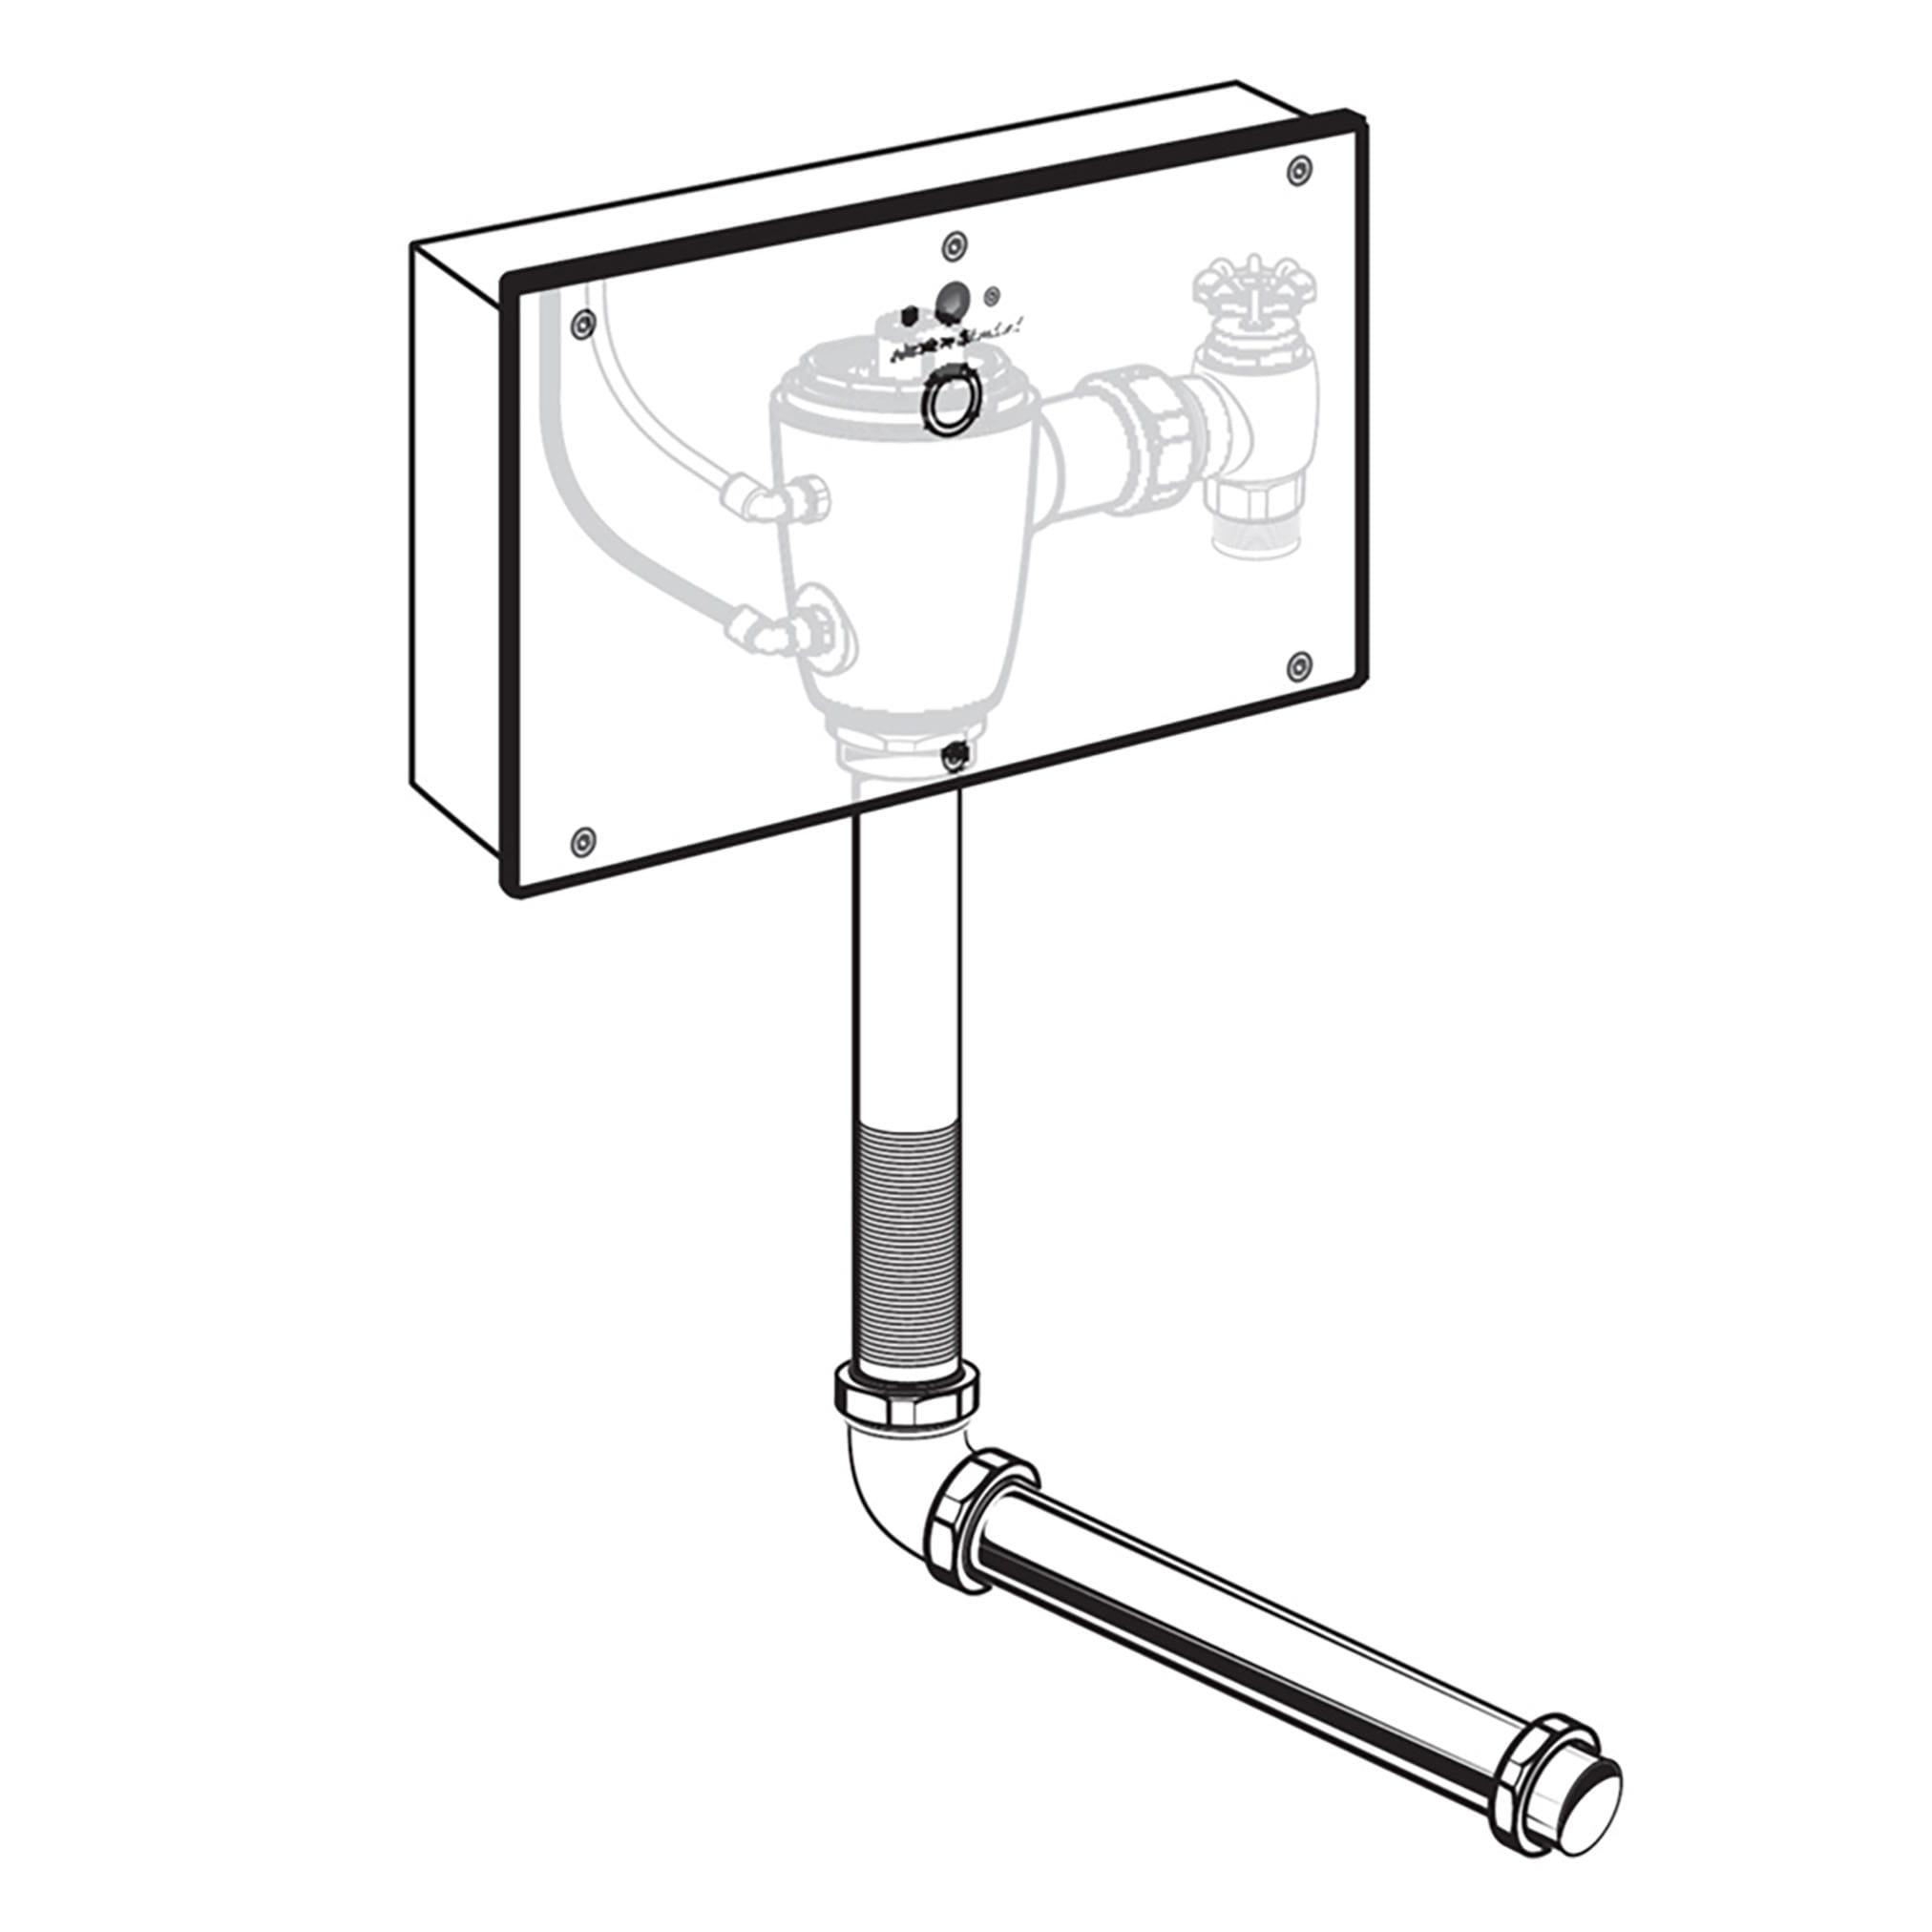 Ultima™ Selectronic Concealed Toilet Flush Valve with Wall Box, Base Model, Piston-Type, 1.28 gpf/4.8 Lpf